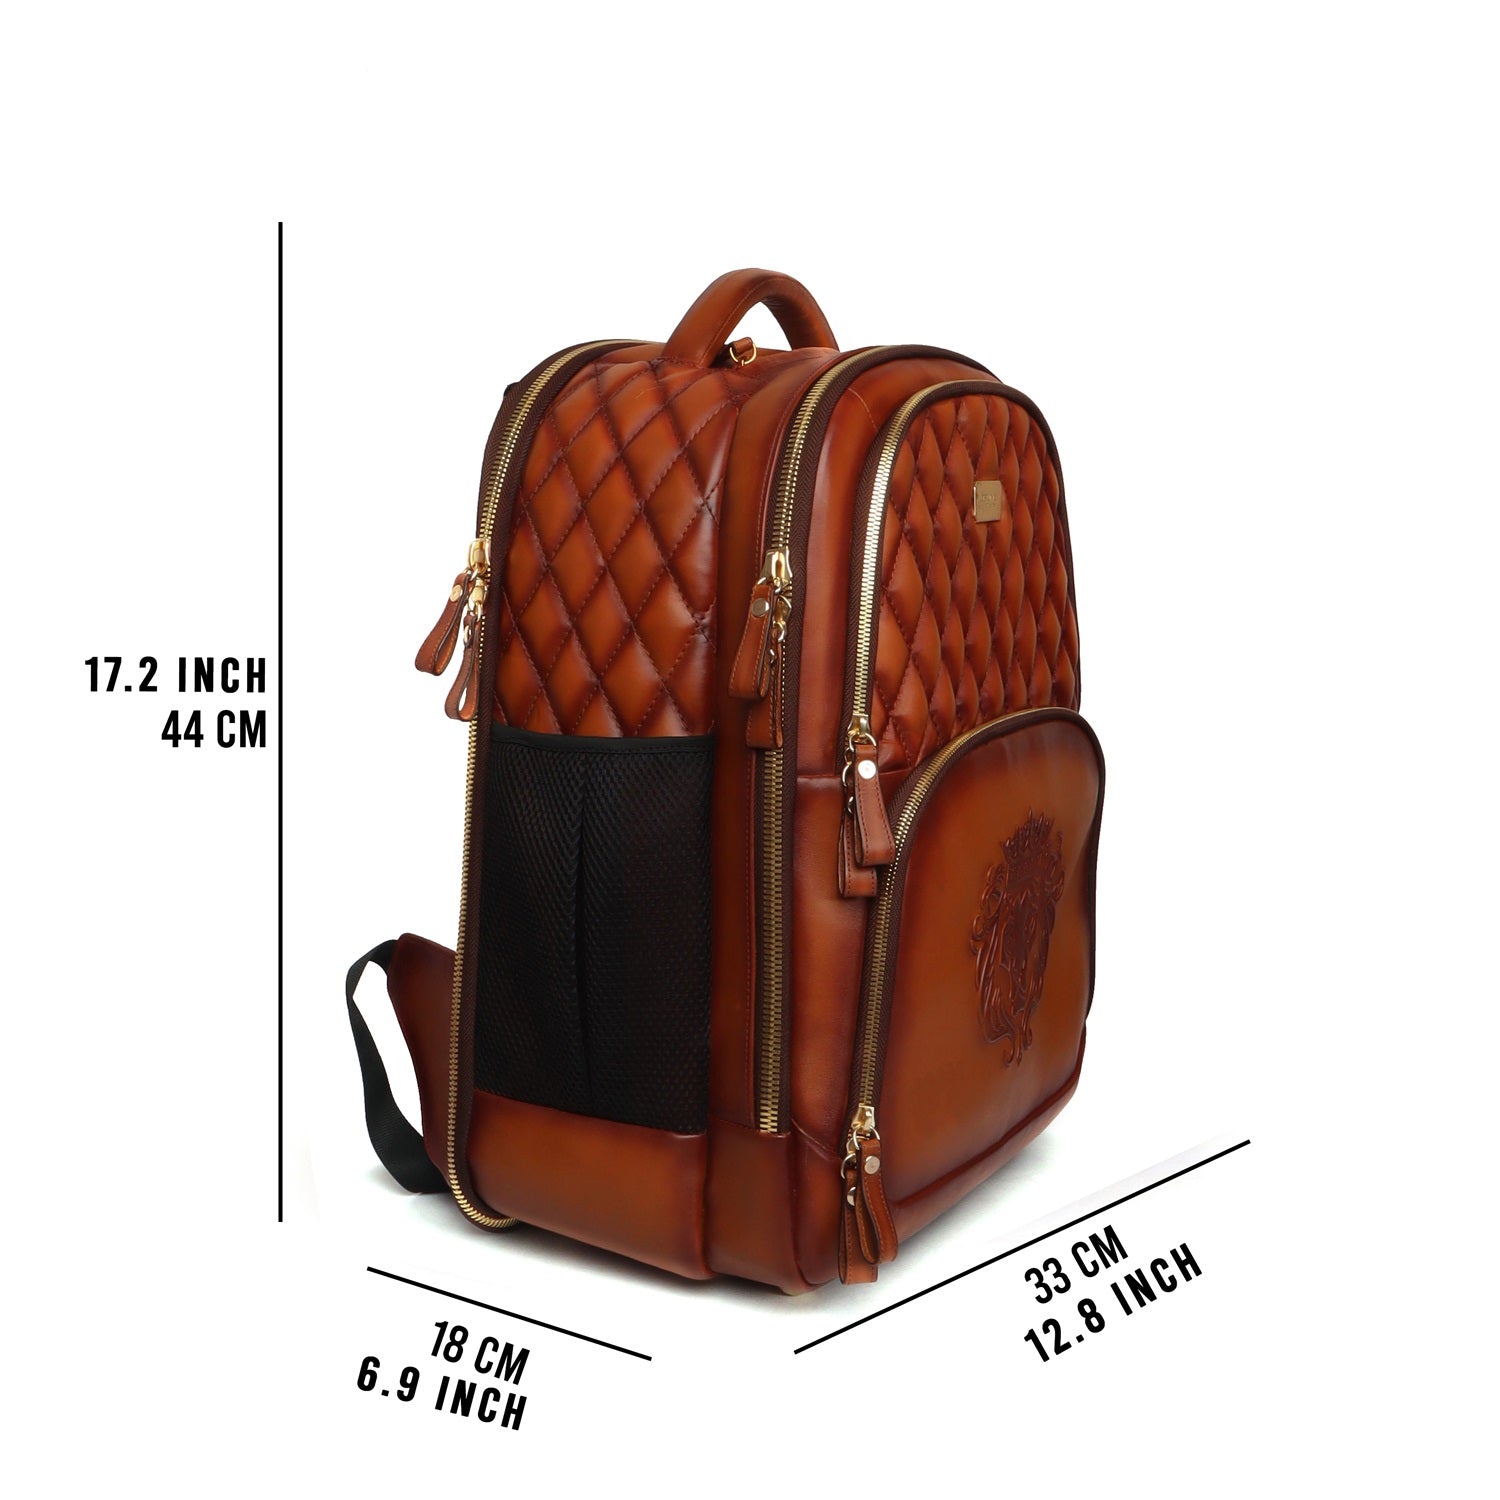 Buy Tan Leather Backpack Online In India - Etsy India